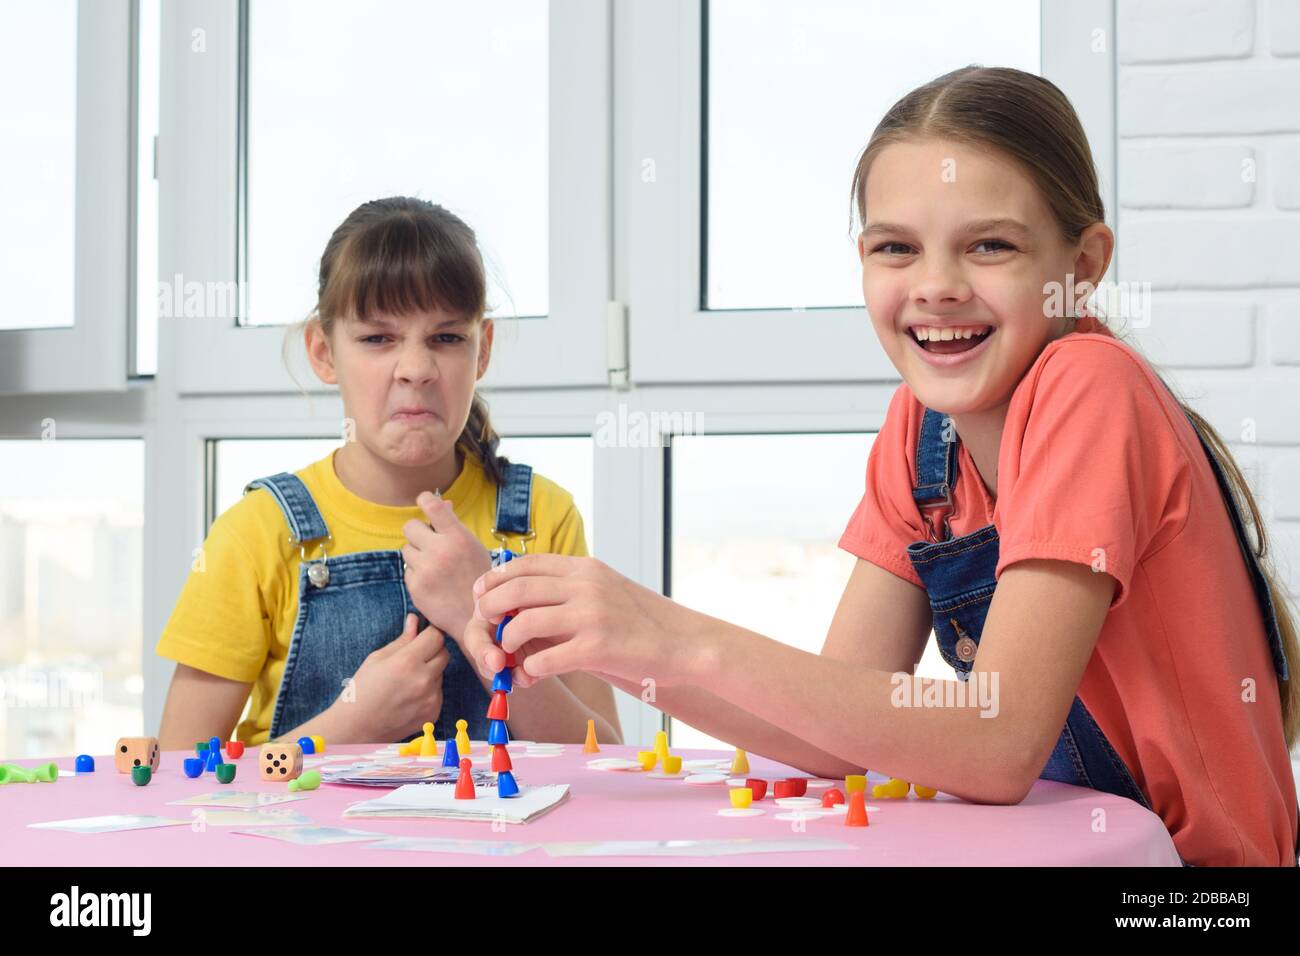 One girl laughs cheerfully, the other makes faces, children play a board game Stock Photo